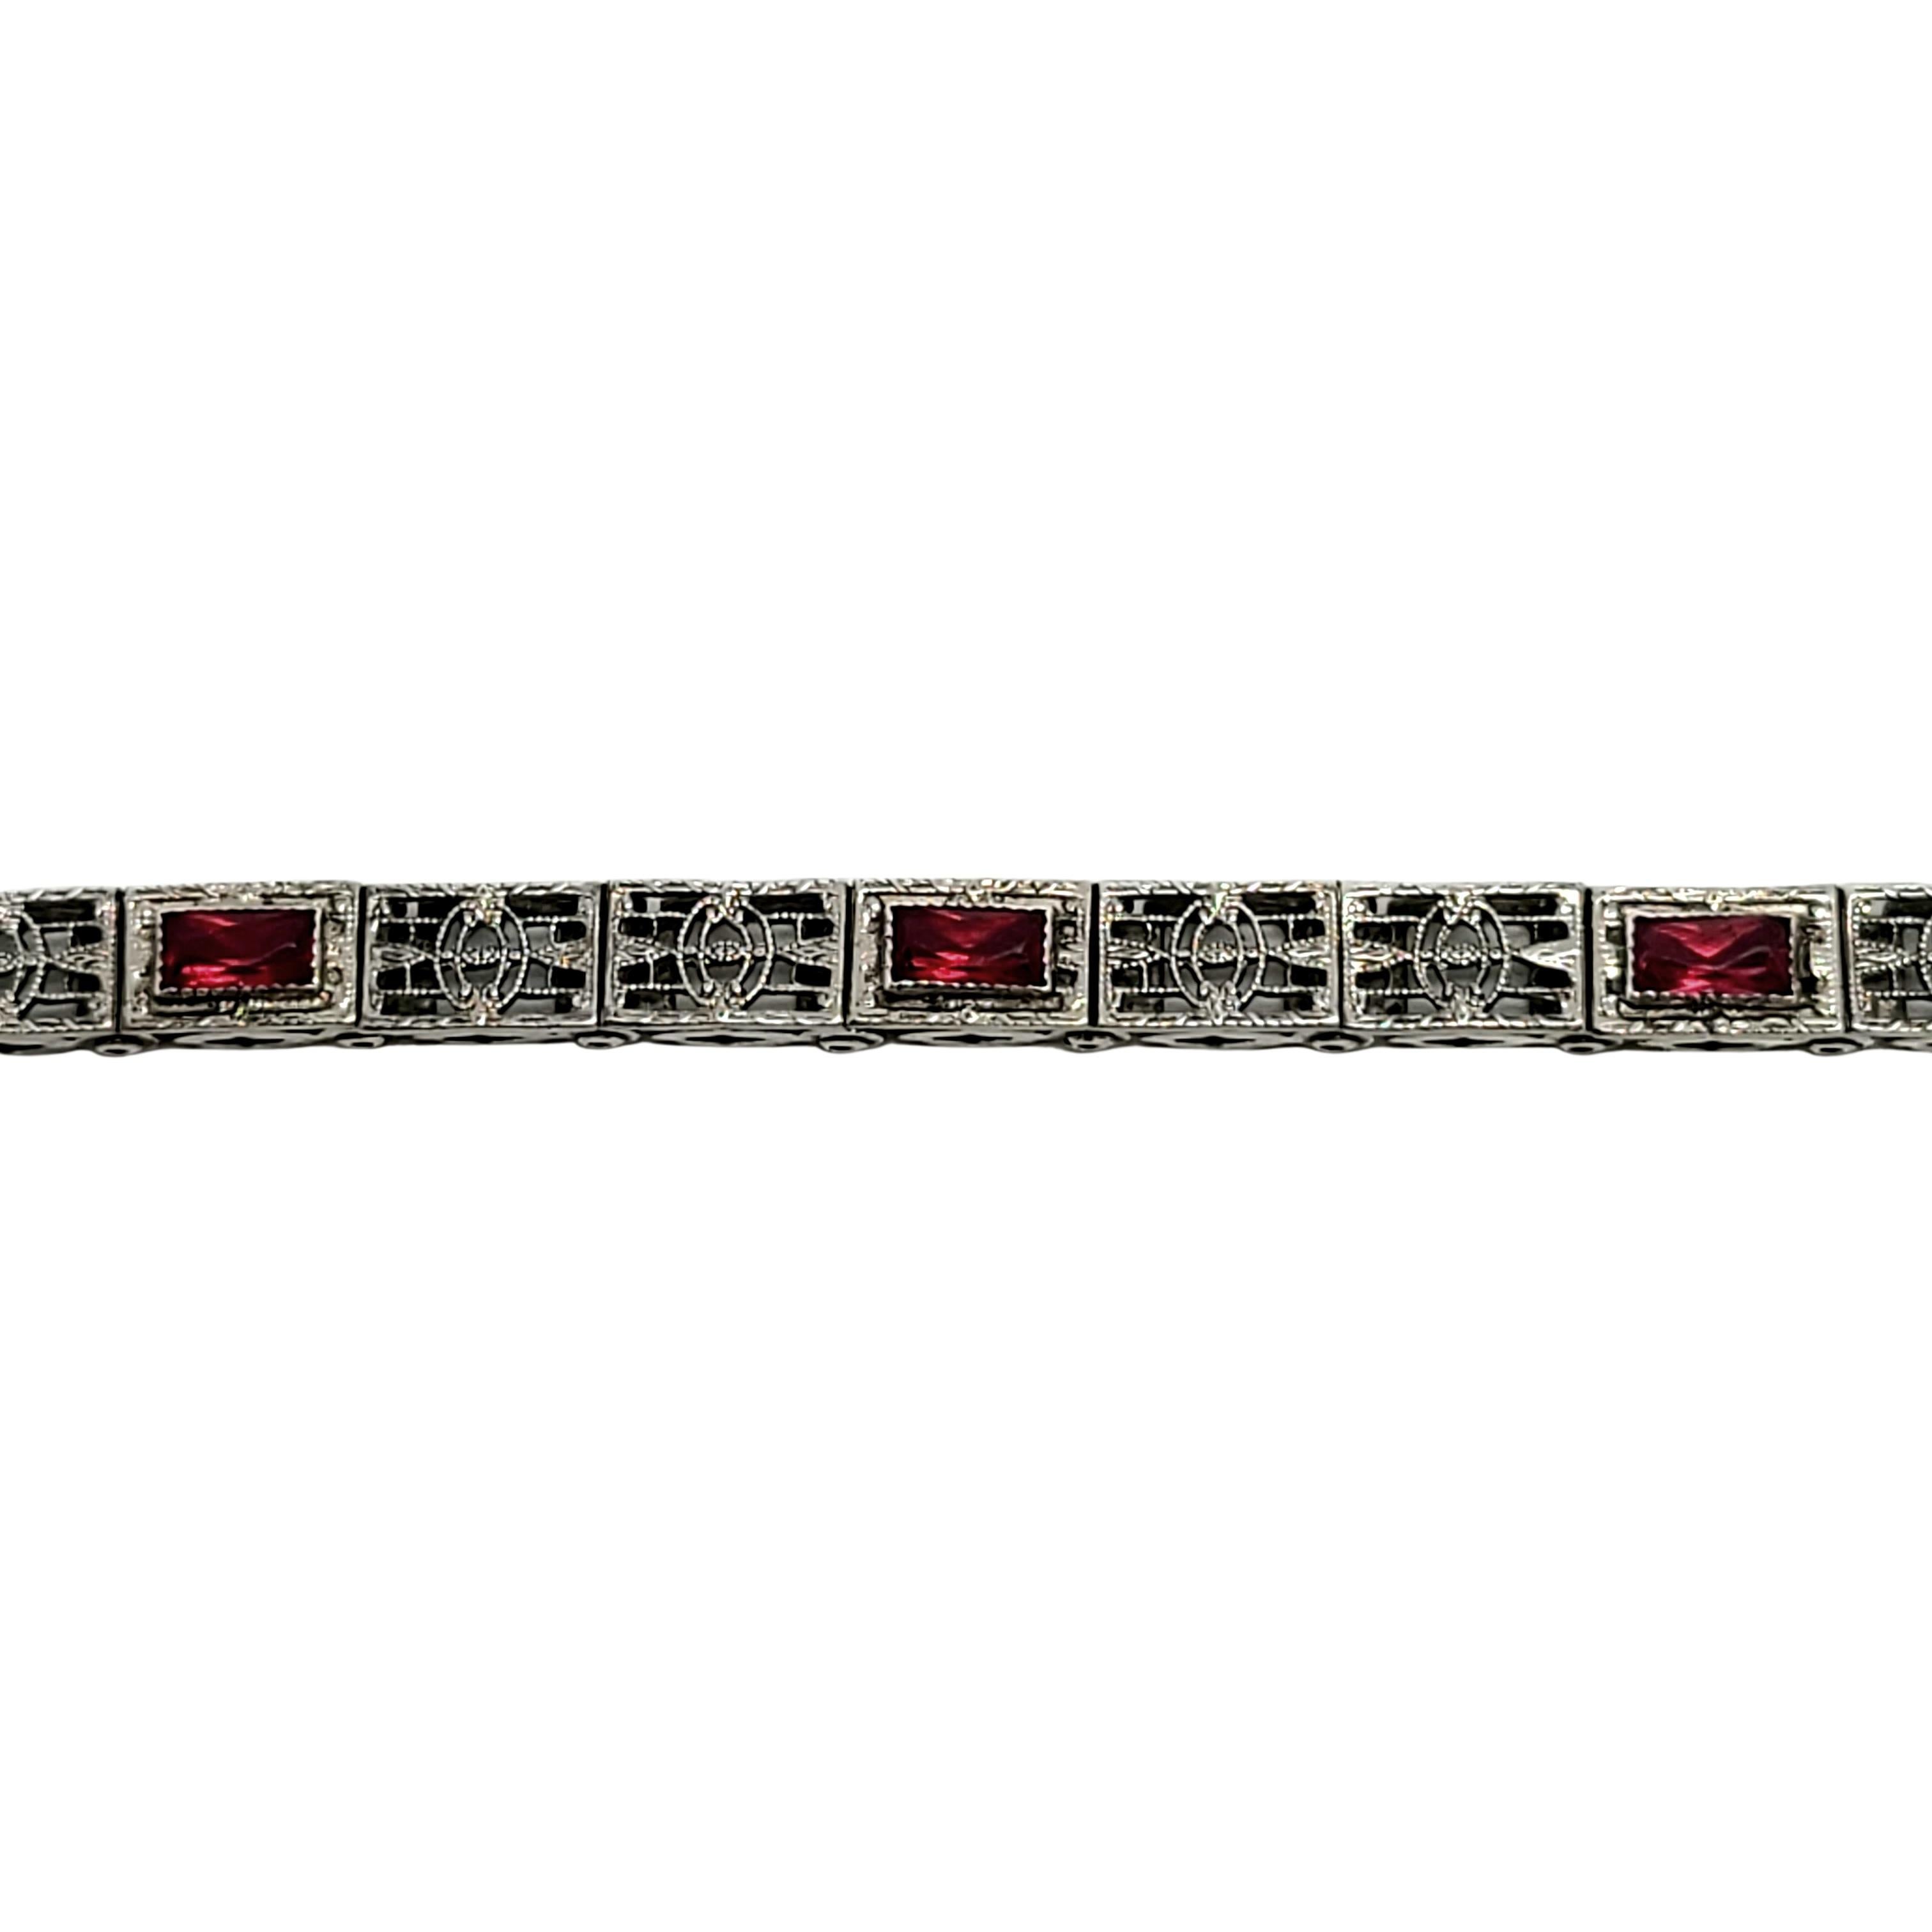 Antique sterling silver filigree panel link bracelet with rectangular red paste stones.

Beautiful and delicate rectangular filigree links, 3 links feature a faceted red paste stone. Push button slide closure with safety clasp.

Measures 6 3/4